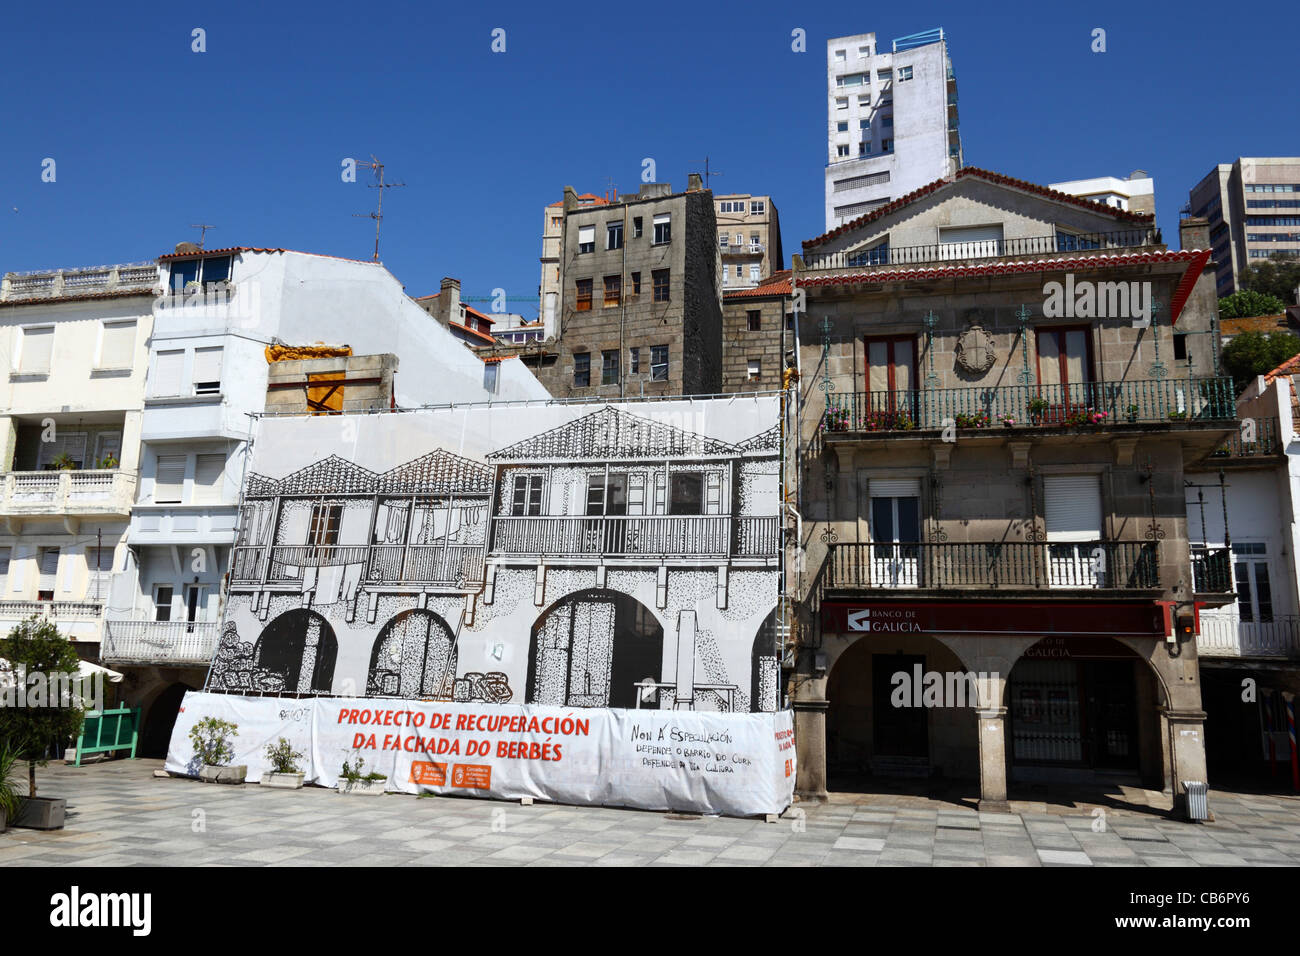 Sign in Galician language on Fachada do Berbes, a historic building that is being restored along the harbour promenade , Vigo , Galicia , Spain Stock Photo